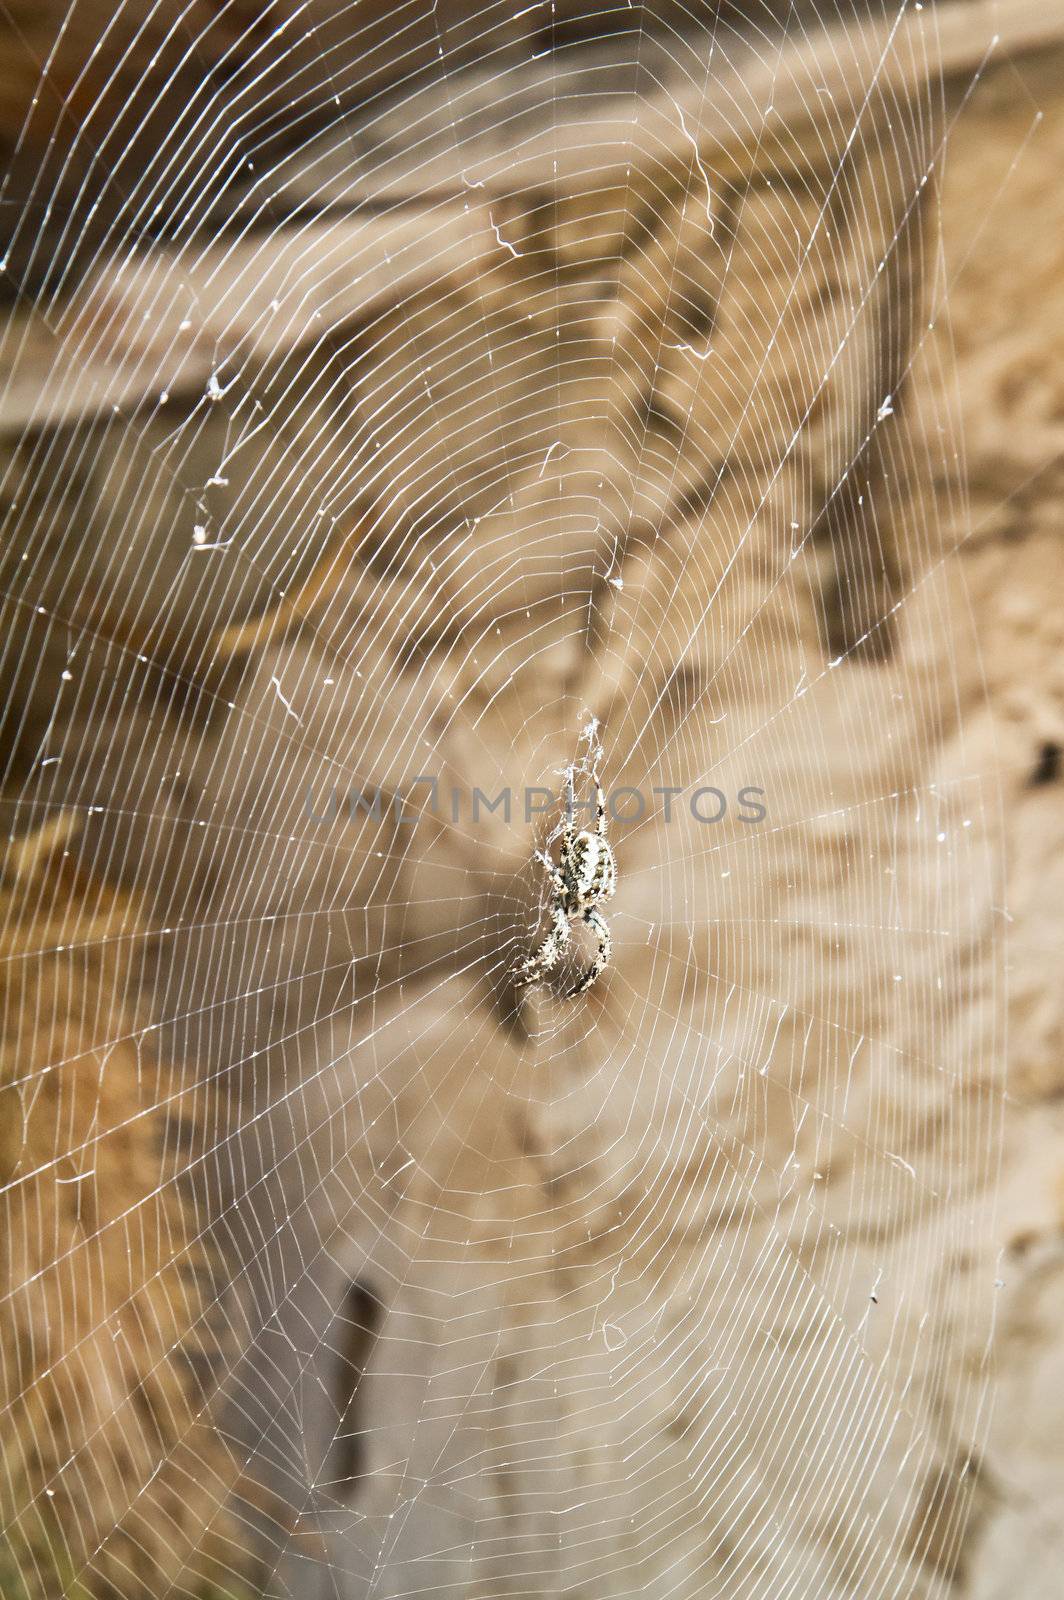 Spider waiting in the center of its web in a barn